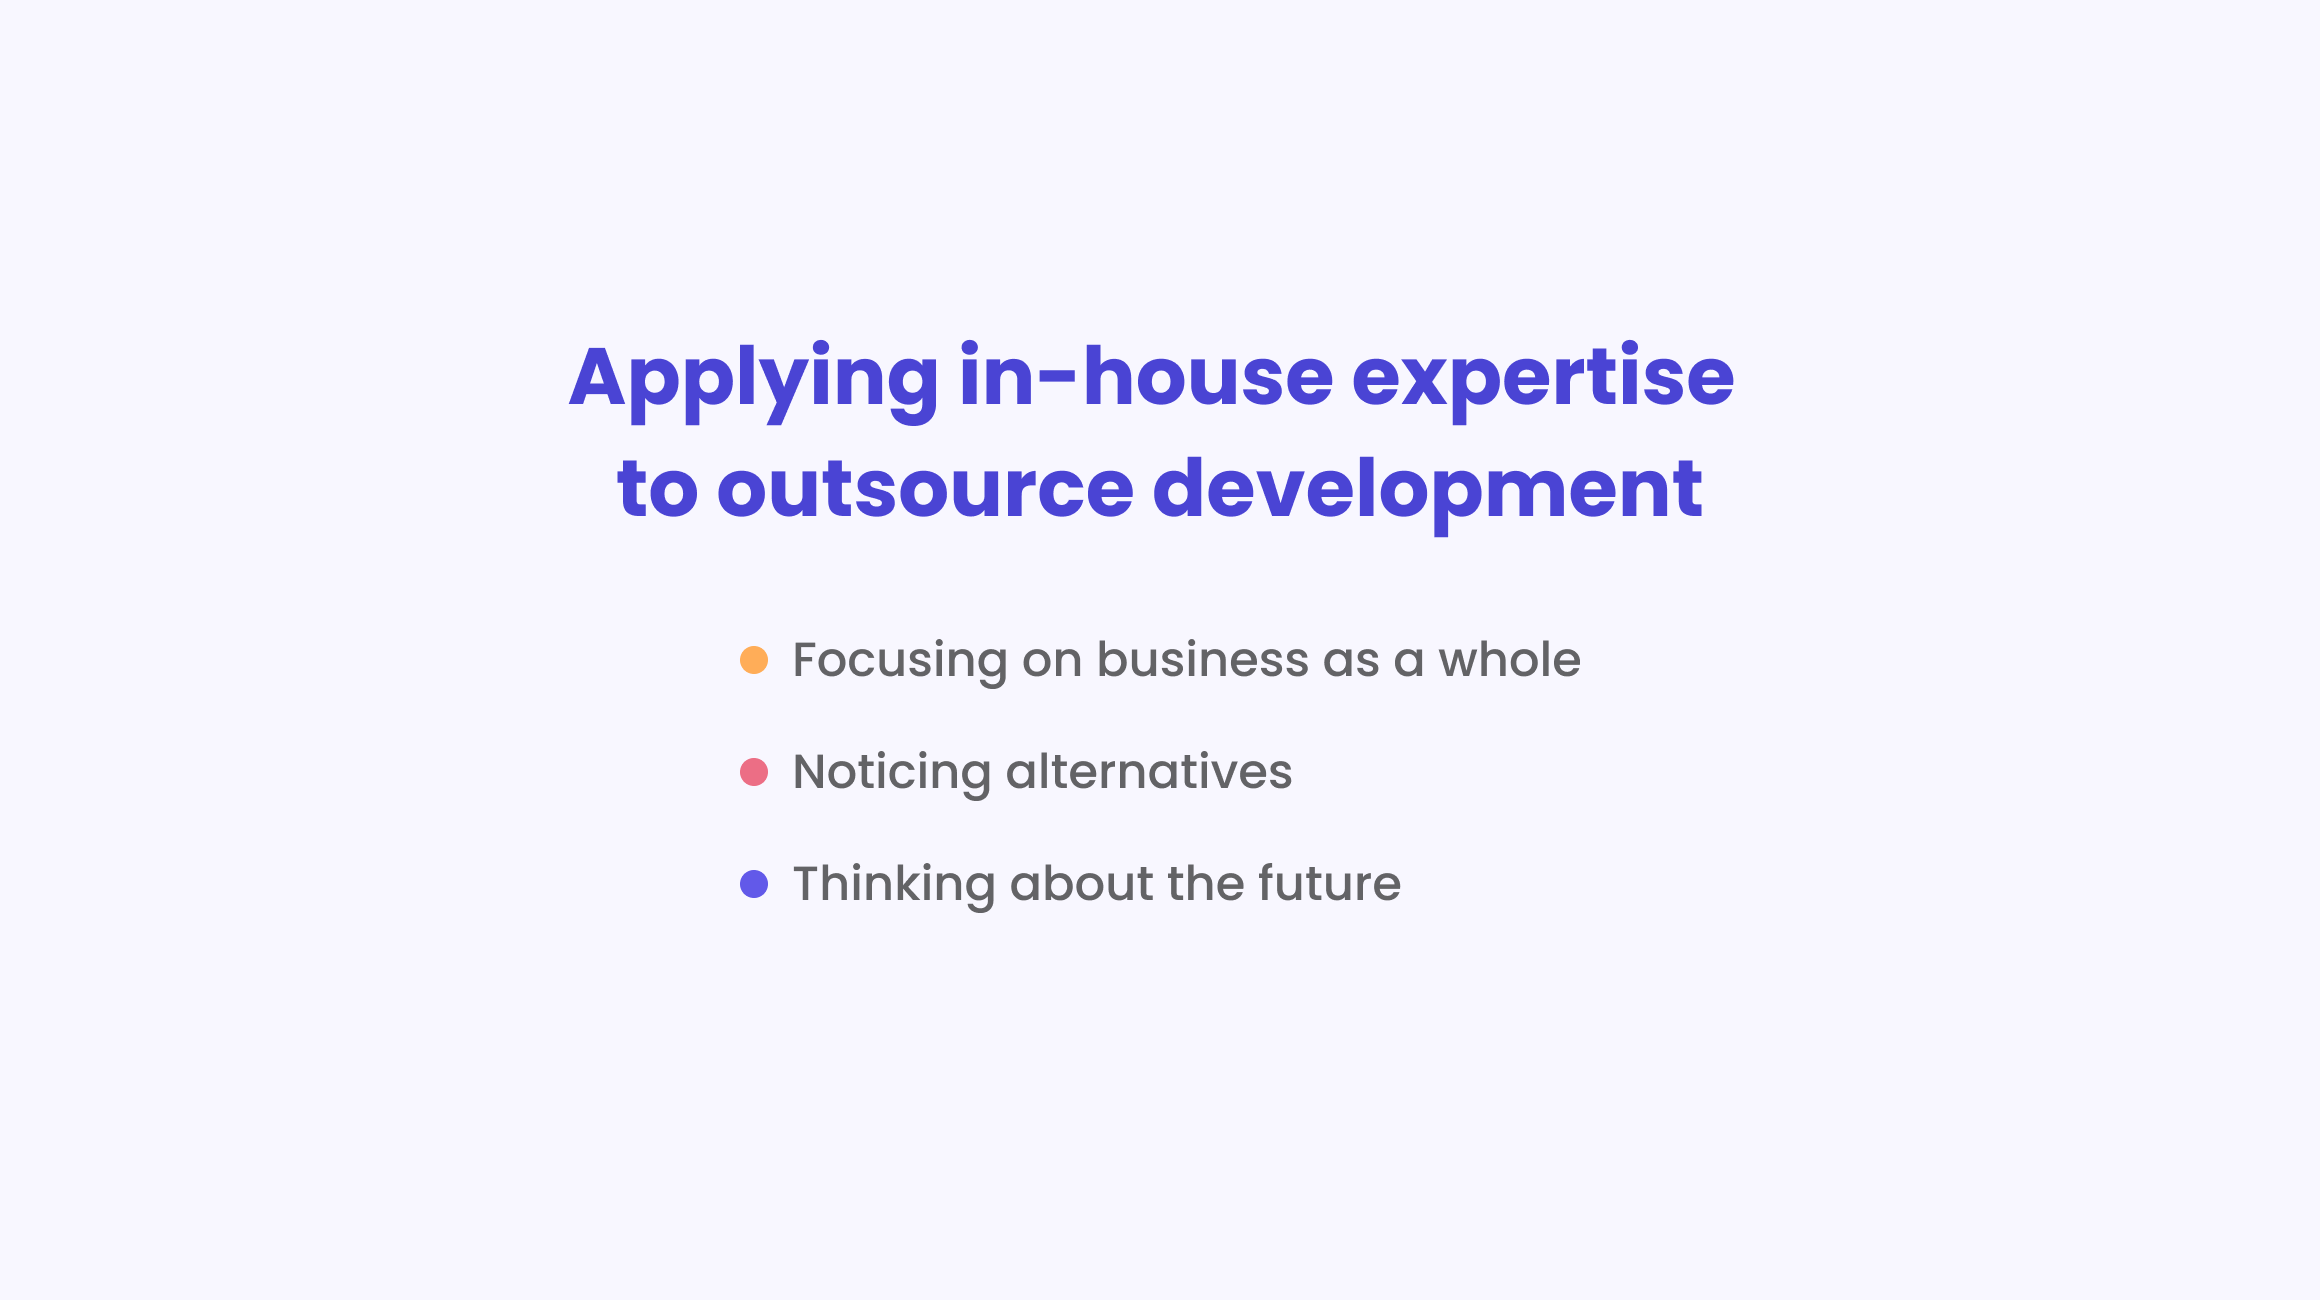 In-house helping outsourcing